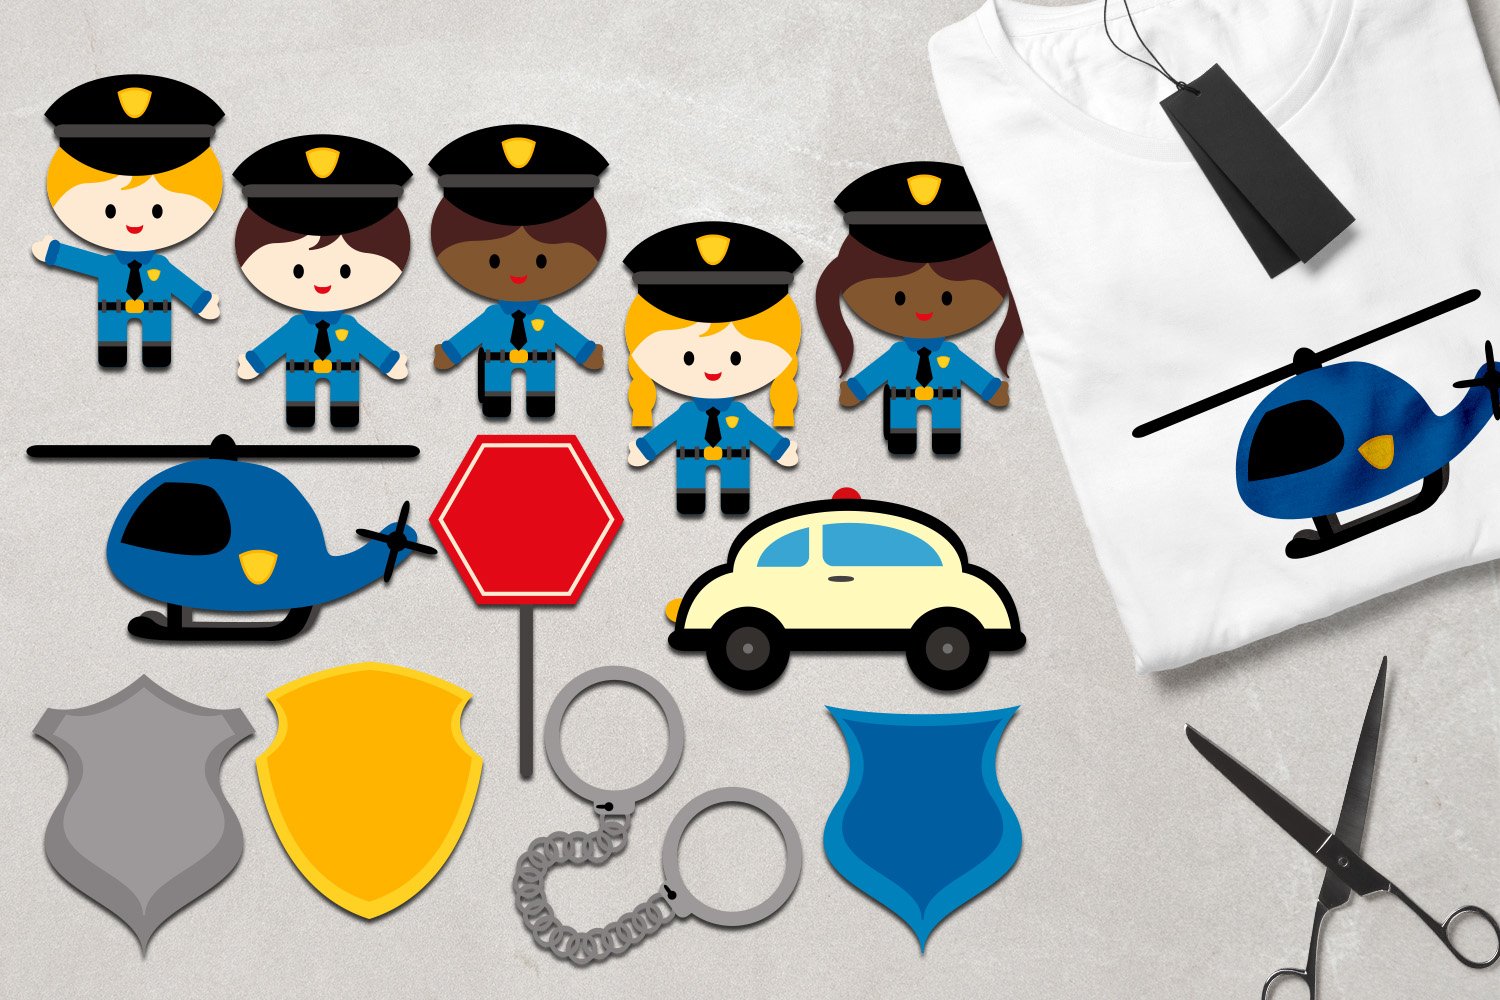 3 policemen, 2 policewomen, 4 police badges, a helicopter, a police car, handcuffs and a white helicopter t-shirt.